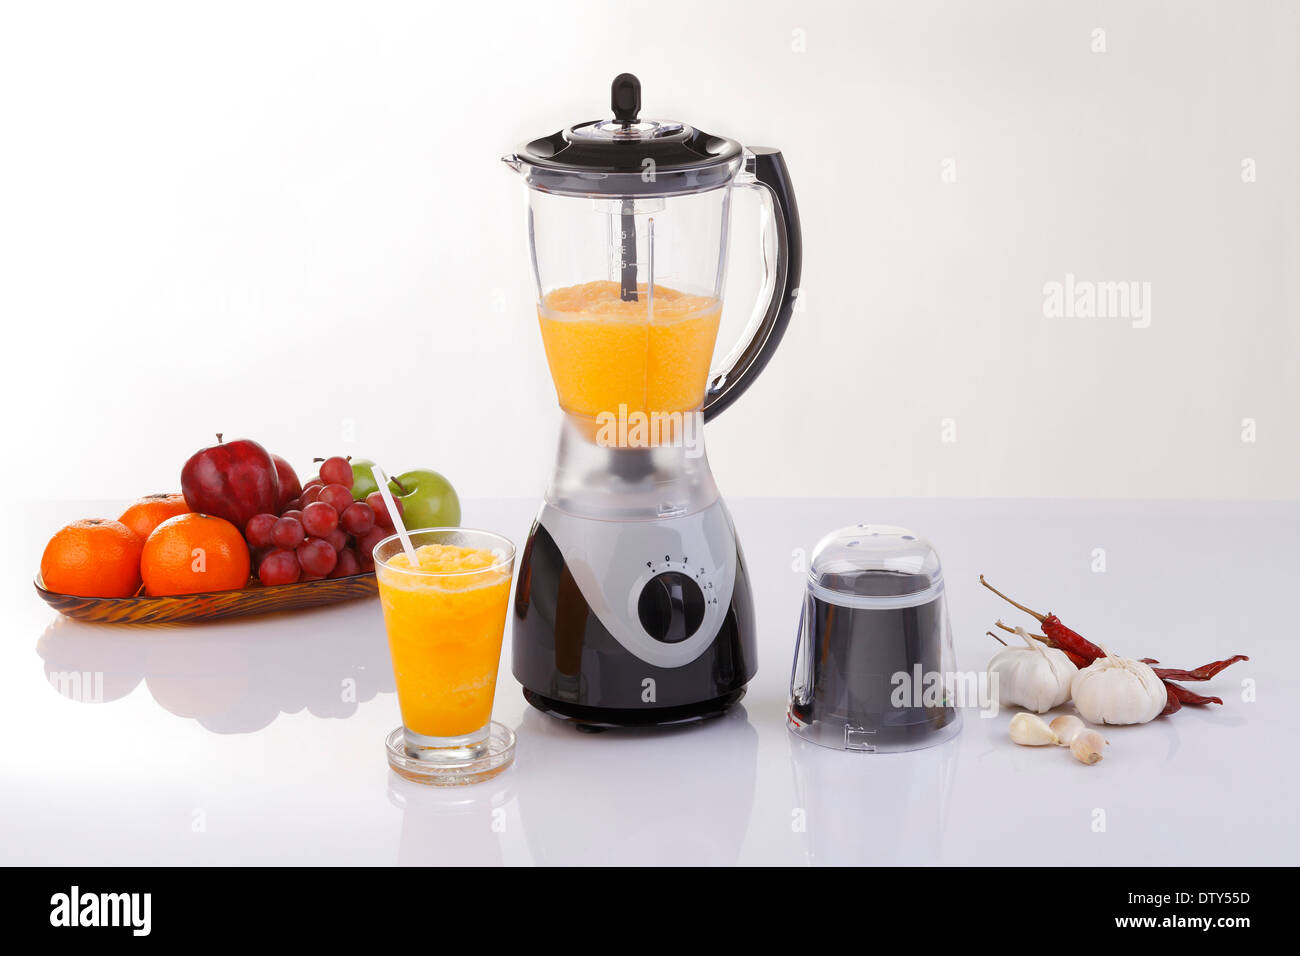 Electric blender with fruits and orange juice Stock Photo